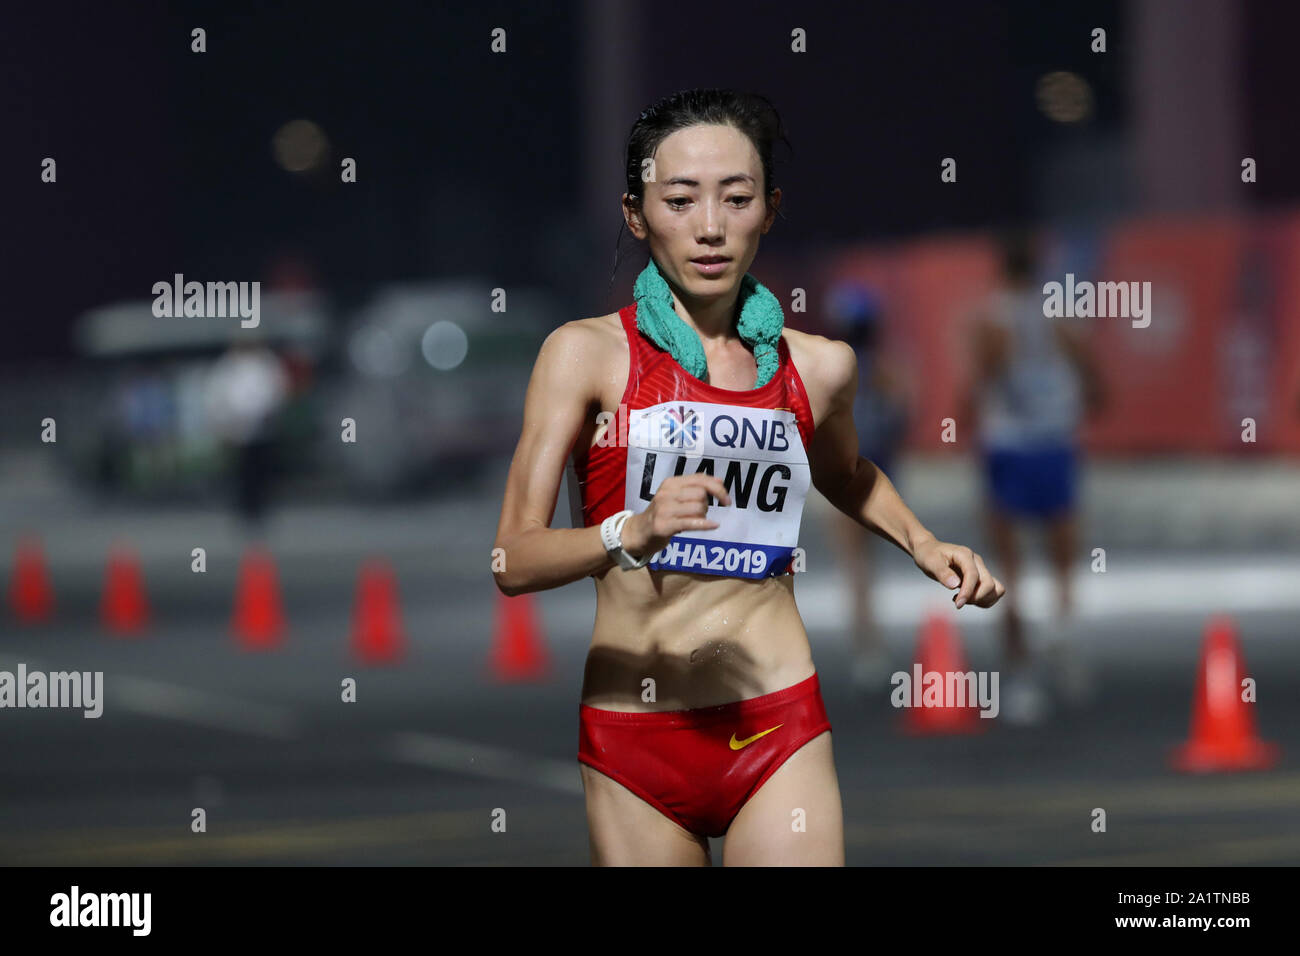 Doha, Qatar. 29th Sep, 2019. Liang Rui of China competes during the women's  50km race walk